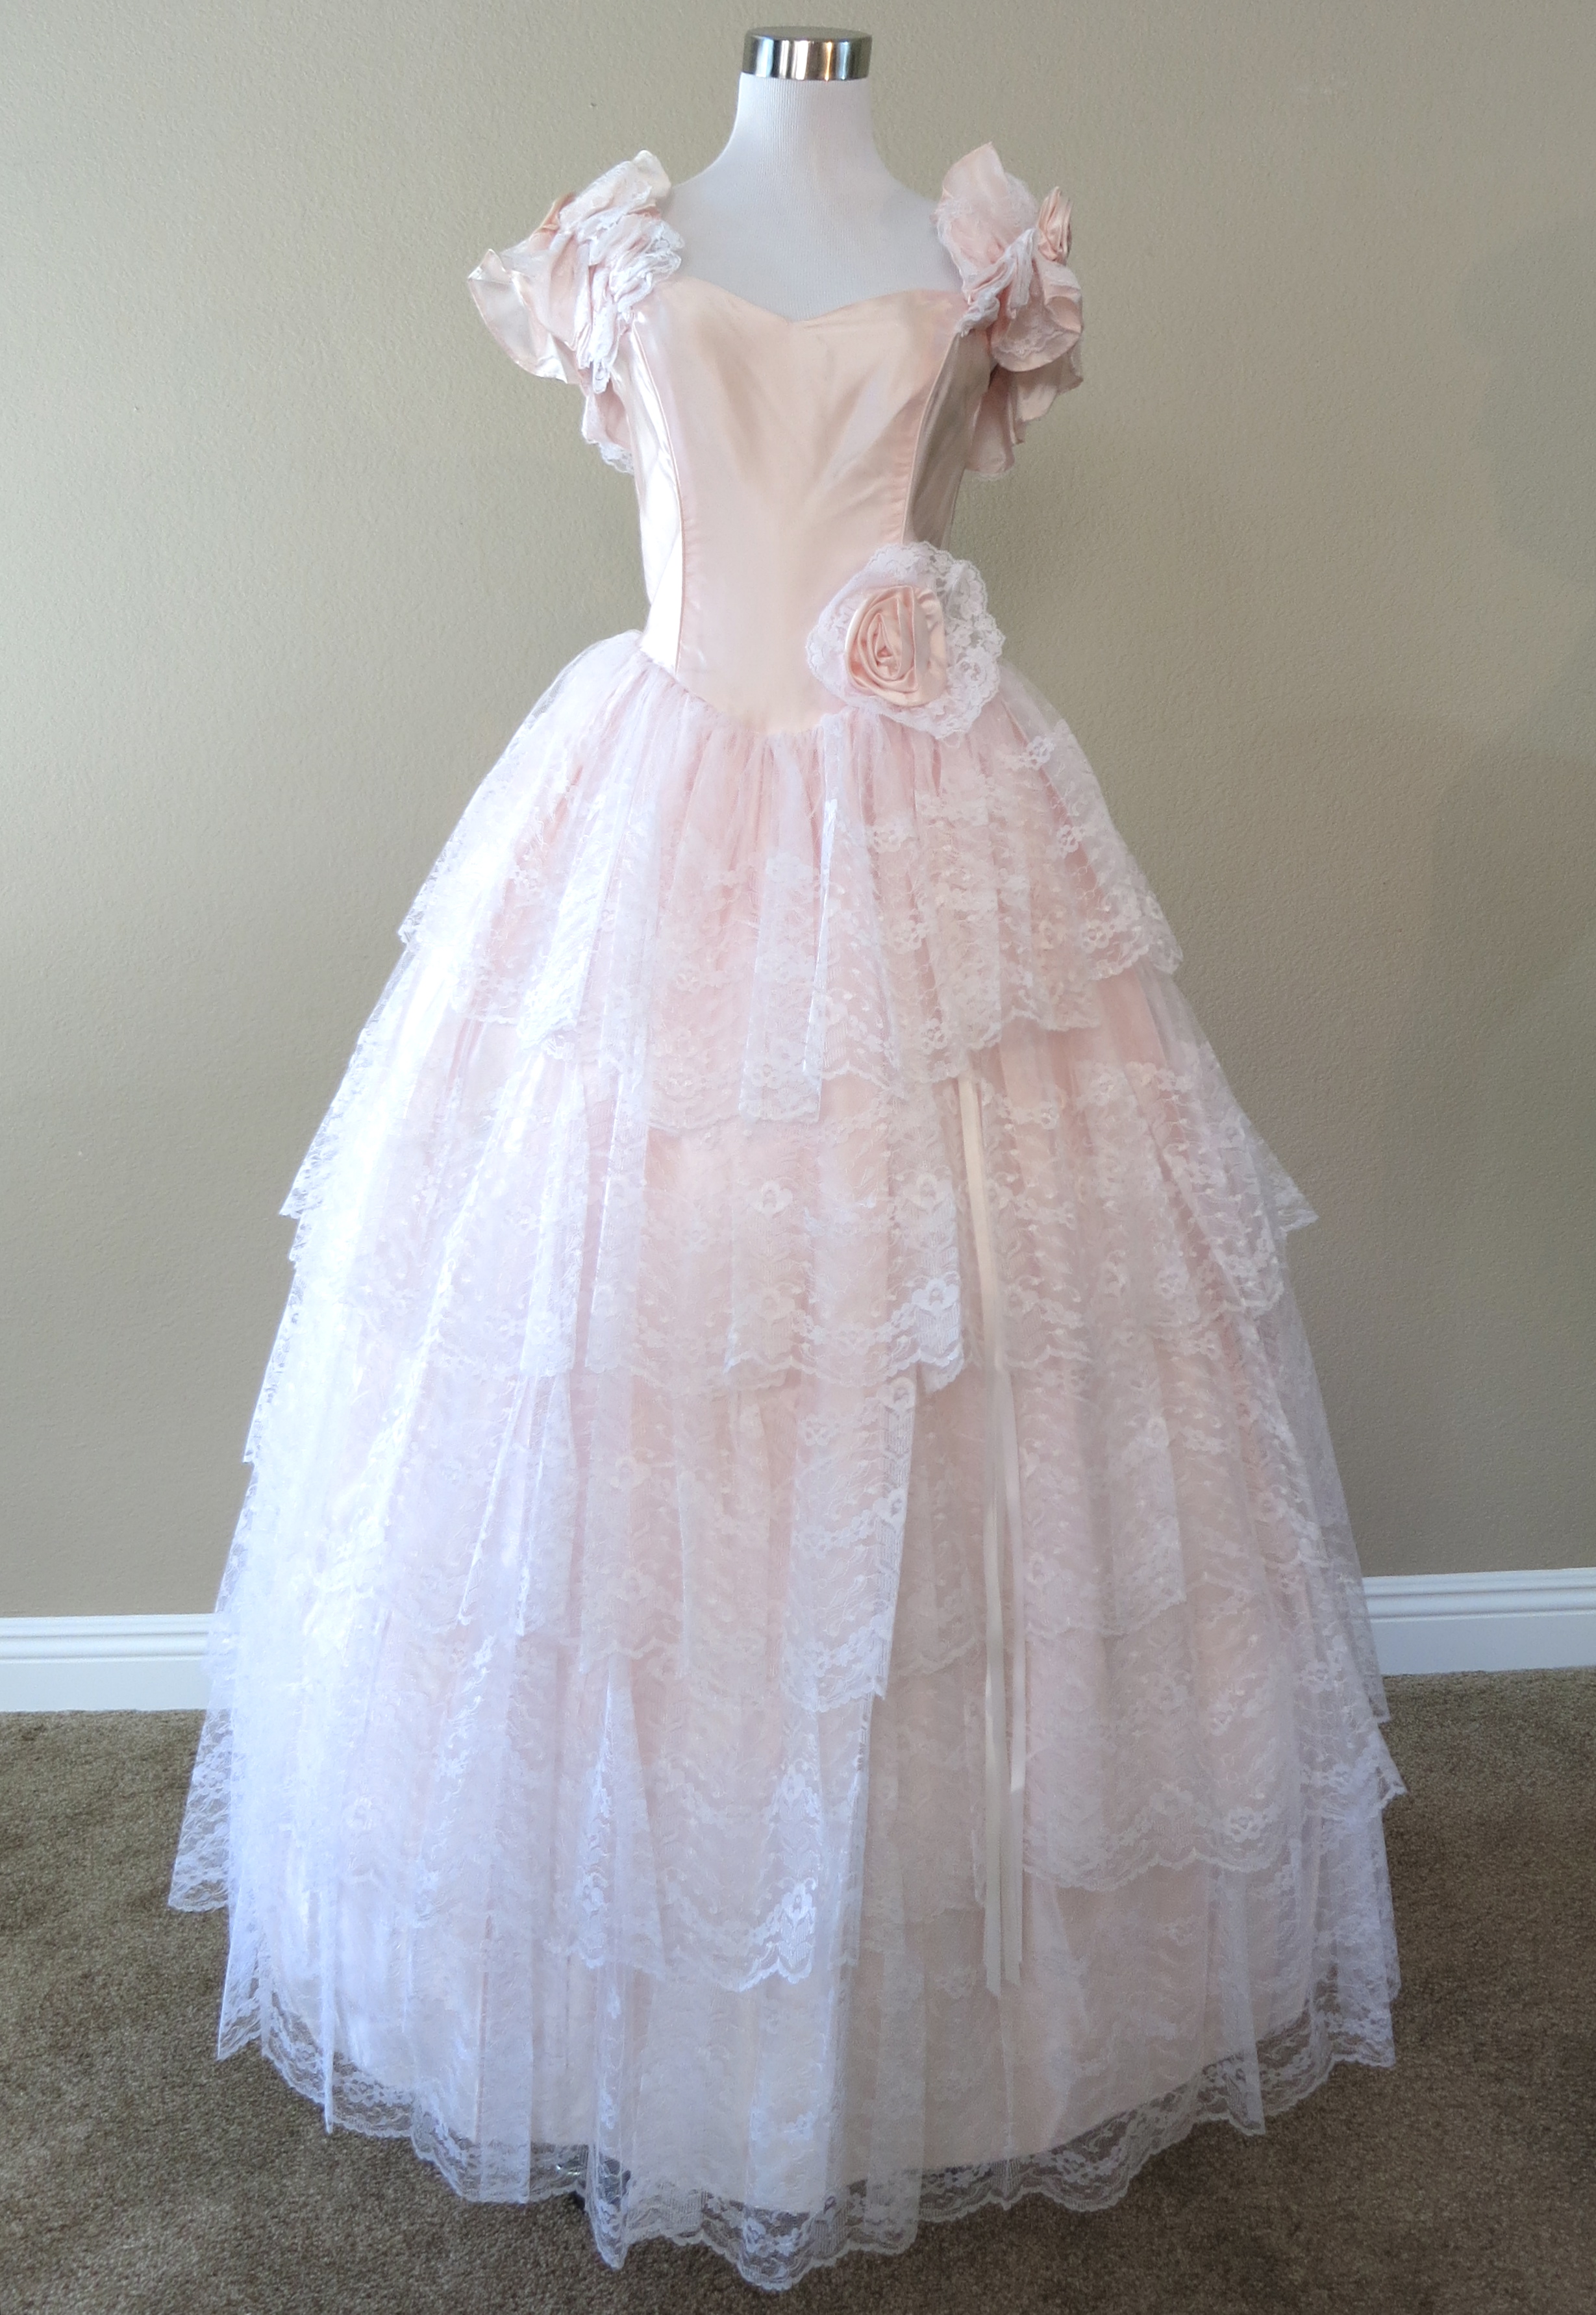 Southern Belle Dresses — Civil War Ball Gowns & Costume